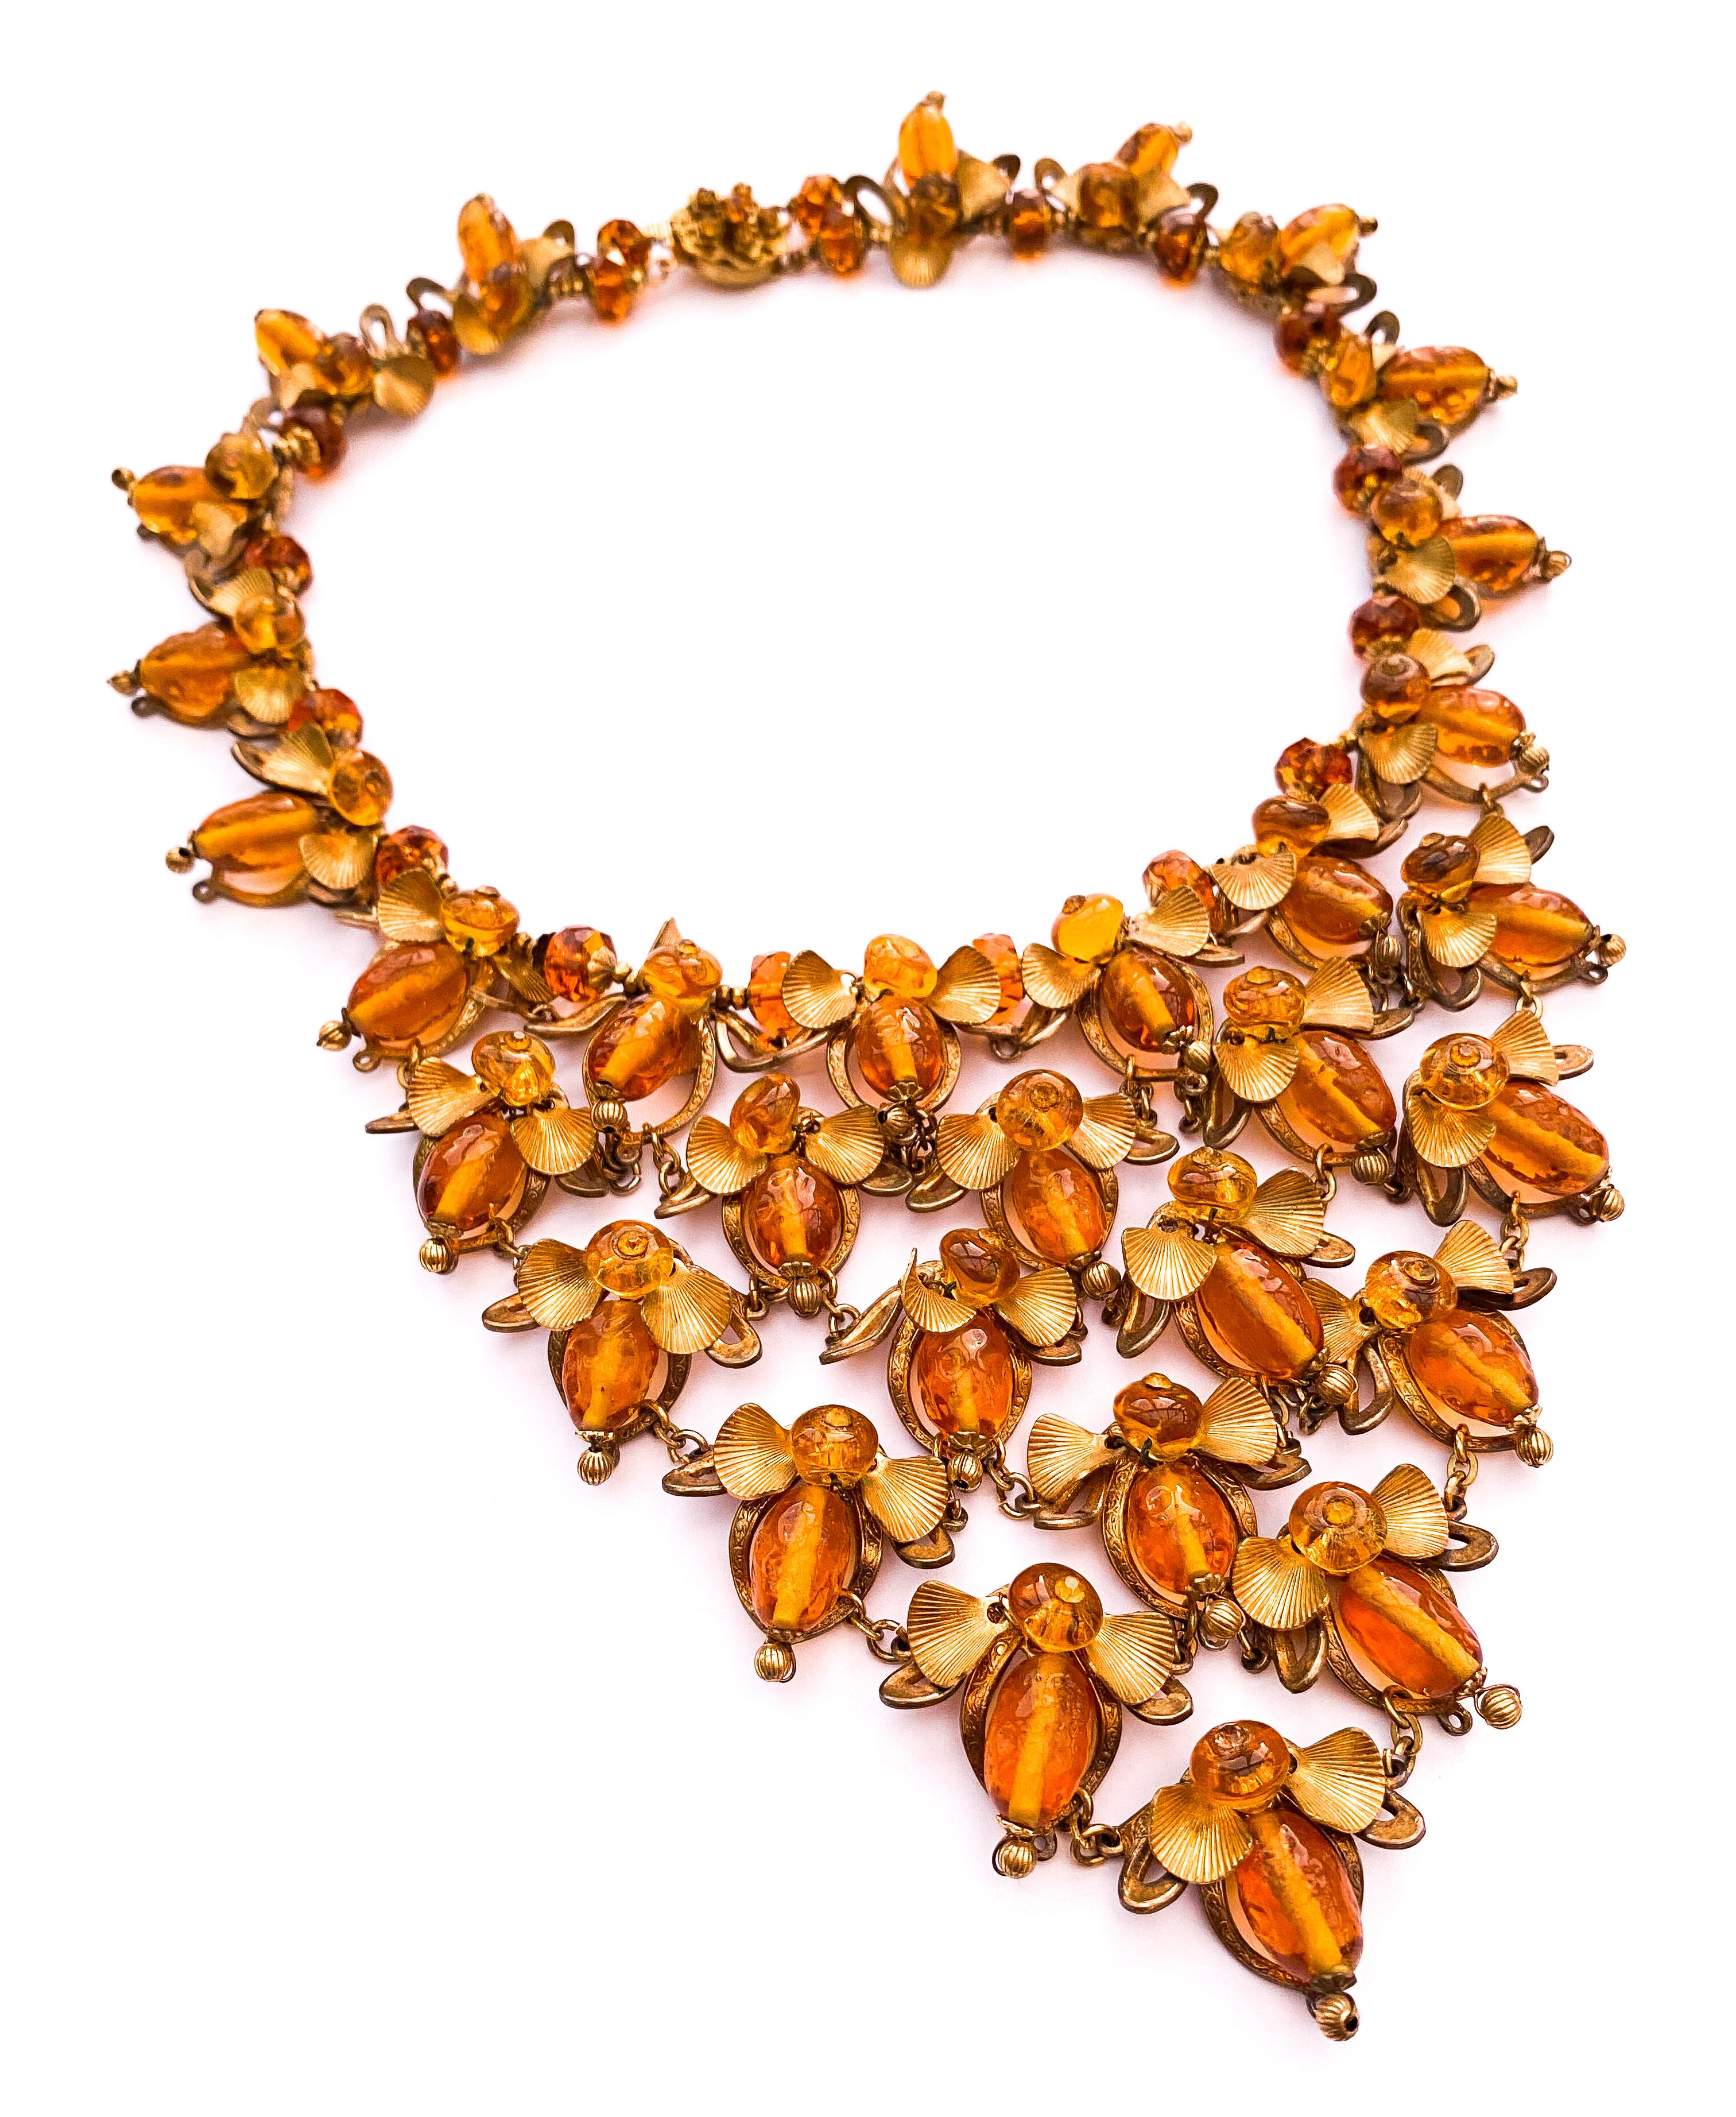 A rare and highly collectable 'bib' necklace, a 'stand out' piece, designed by Robert Clark for Miriam Haskell, a most imaginative and highly unusual design, depicting bees, in the most creative way. The oblong topaz coloured beads were manufactured